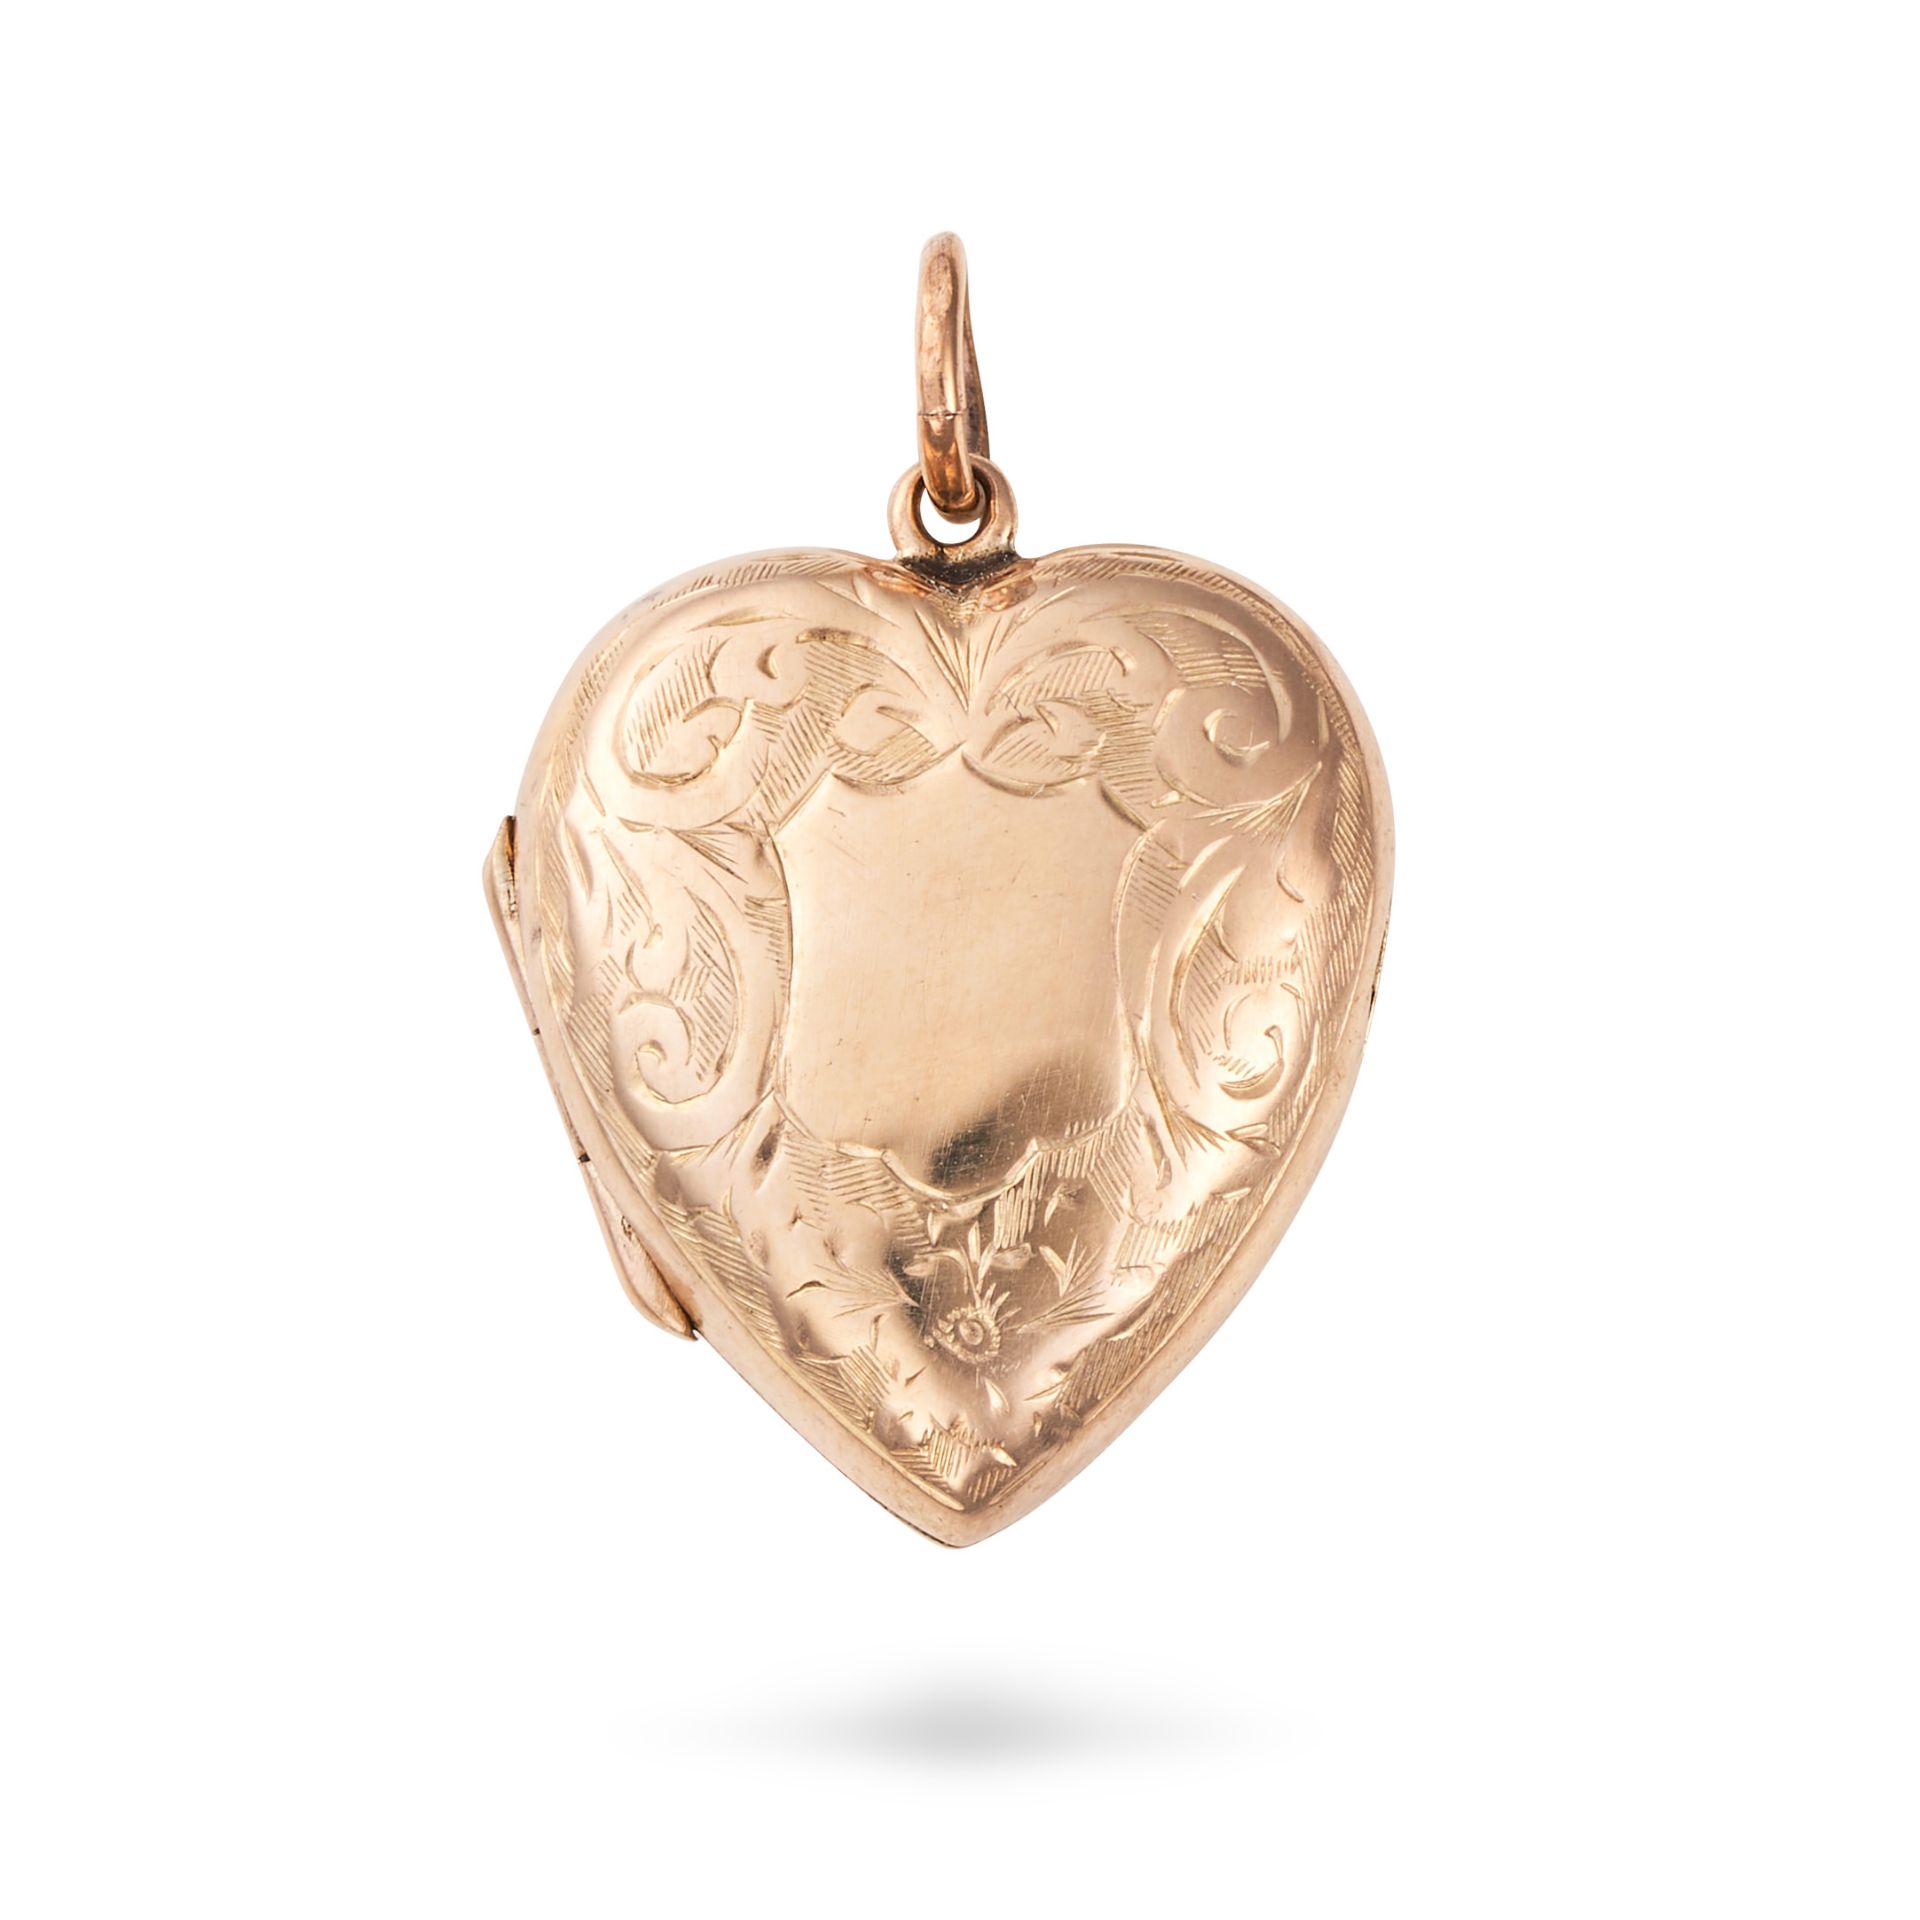 NO RESERVE - AN ANTIQUE HEART LOCKET PENDANT in yellow gold, the hinged heart shaped pendant engr...